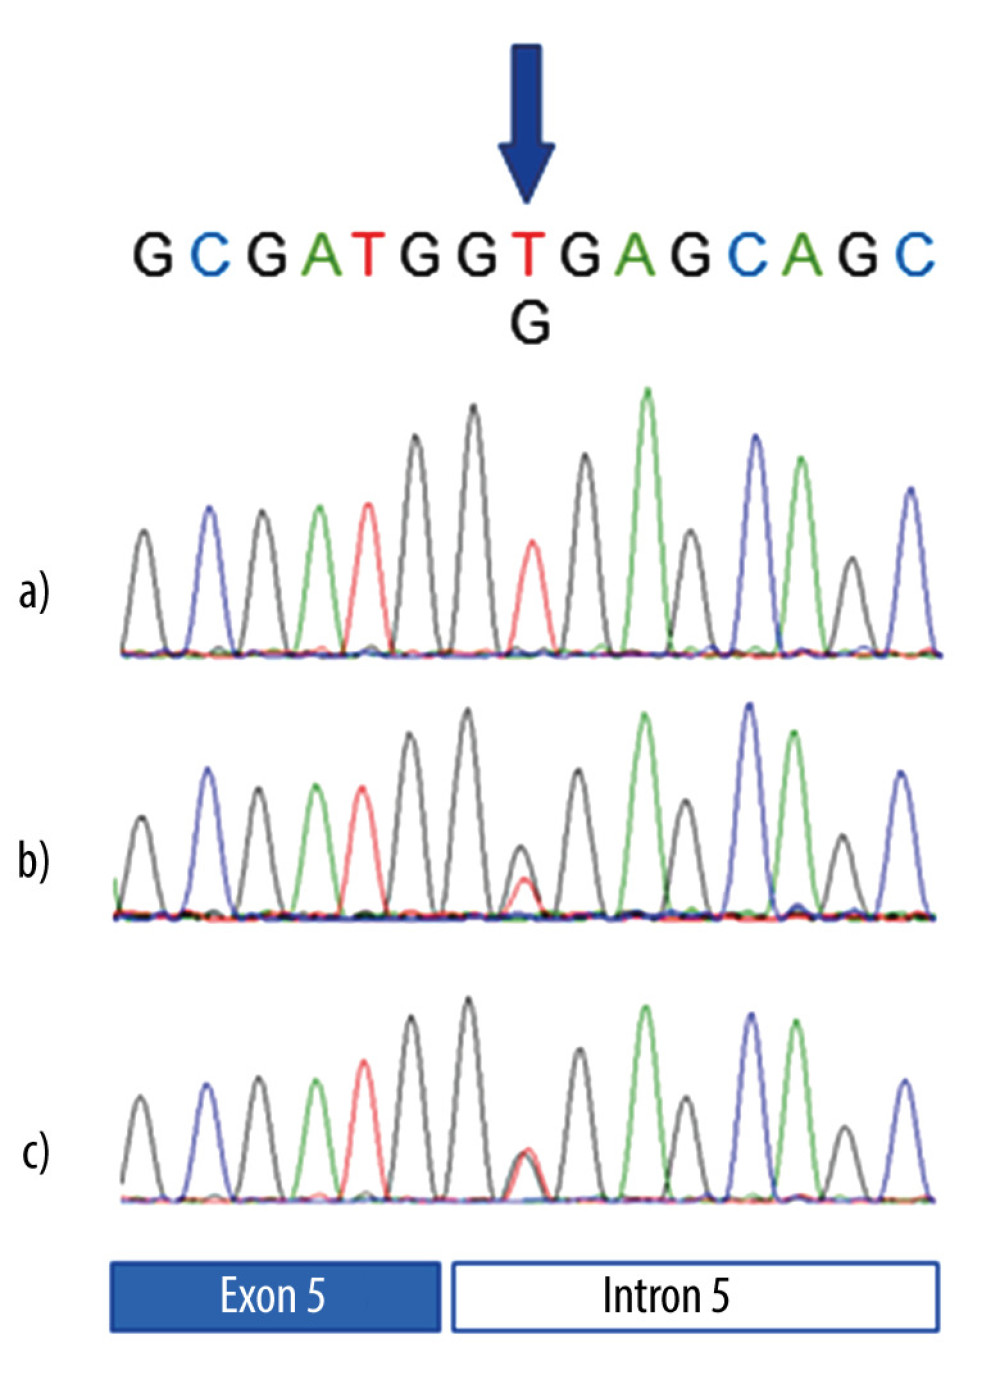 Sequencing analysis of the TP53 gene in the patient. a), b), and c) represent fingernails, blood, and buccal swab, respectively. The pathogenic variant was detected in the blood and the buccal swab, but not in the fingernail.